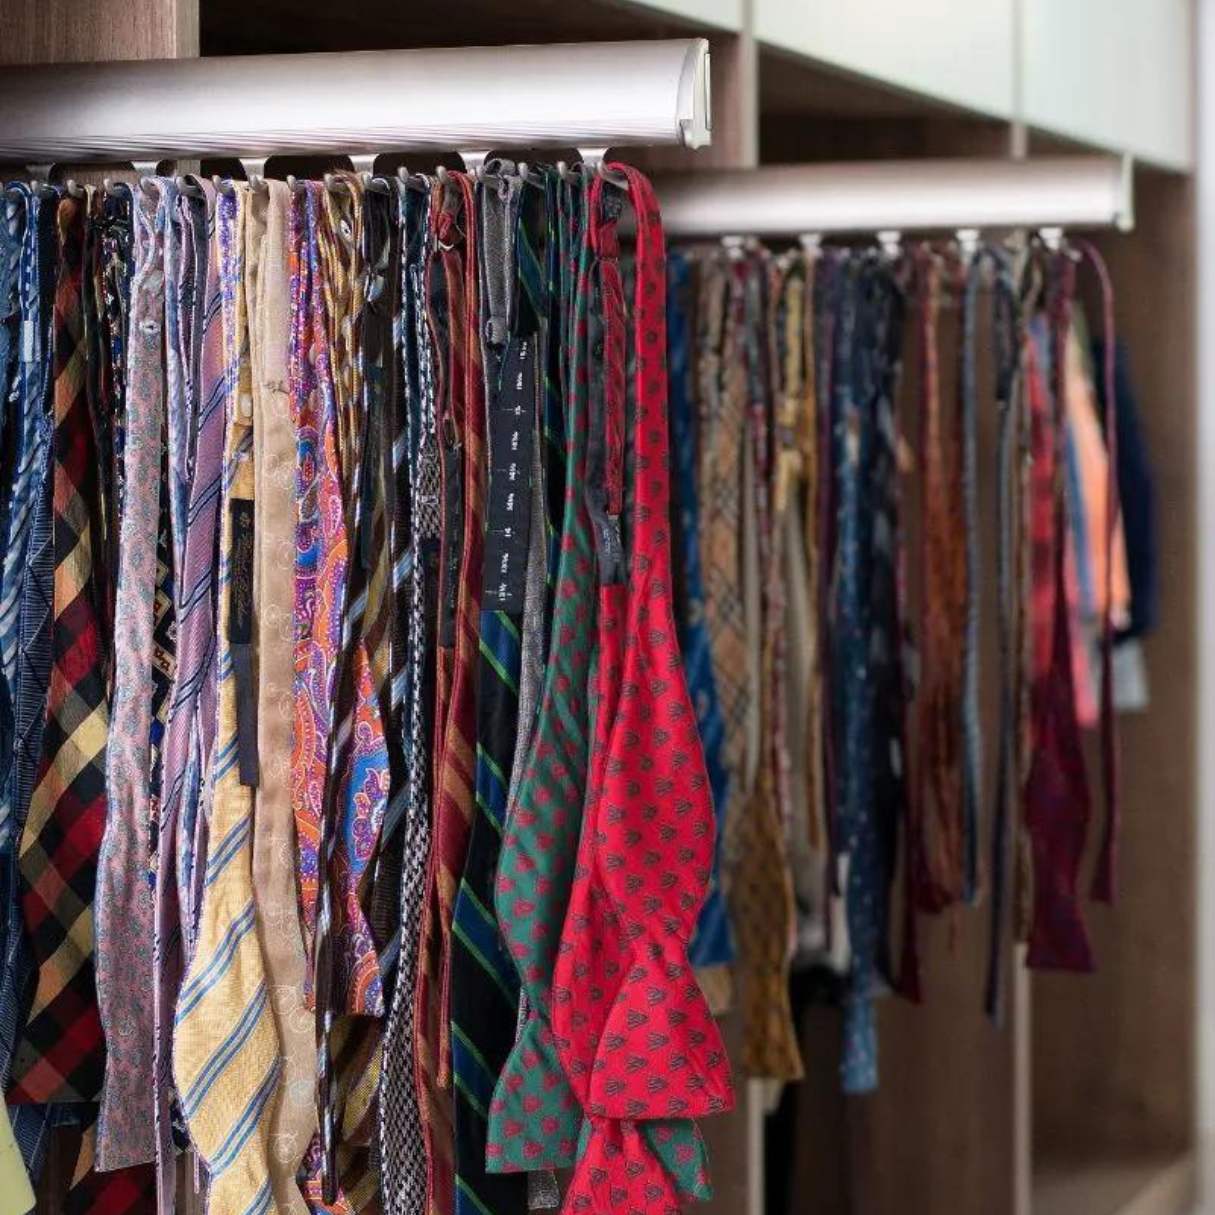 How To Store Ties In The Closet